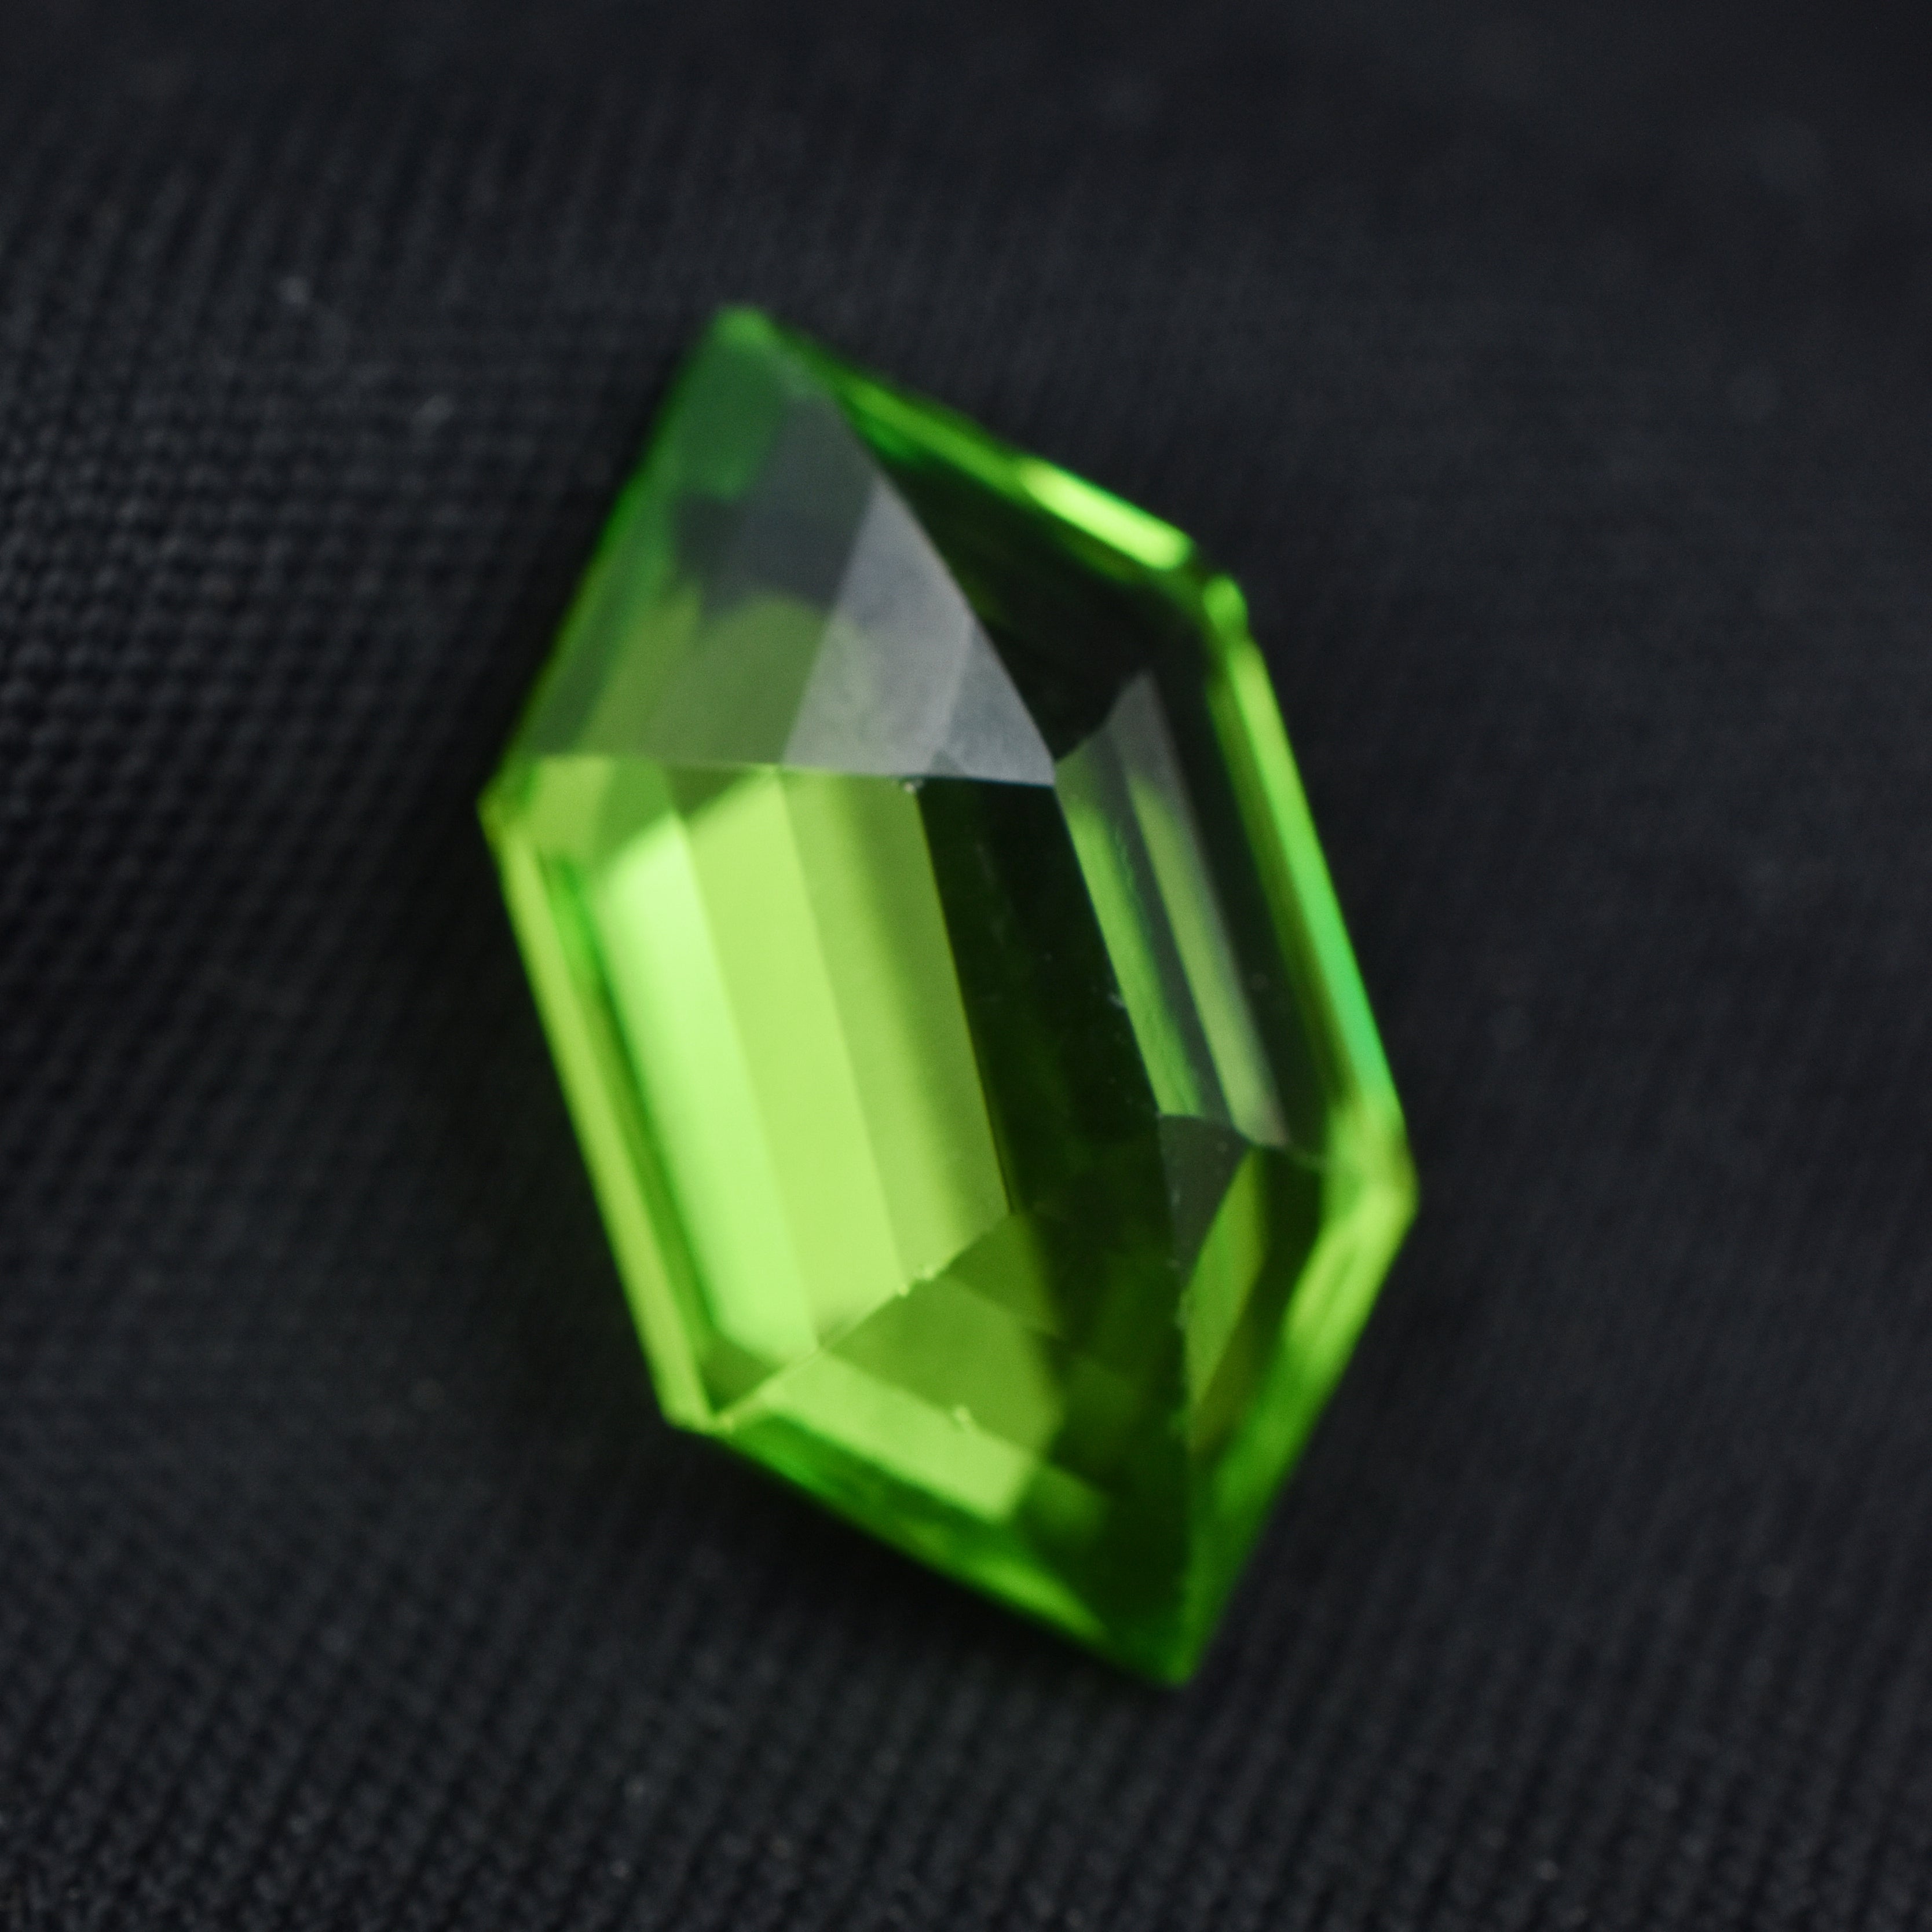 Pendant Making Gem Specially For Engagement Gift 11.12 Carat Green Peridot Fancy Shape Loose Gemstone | High Sale | Precious Peridot | Free Shipping With Gift